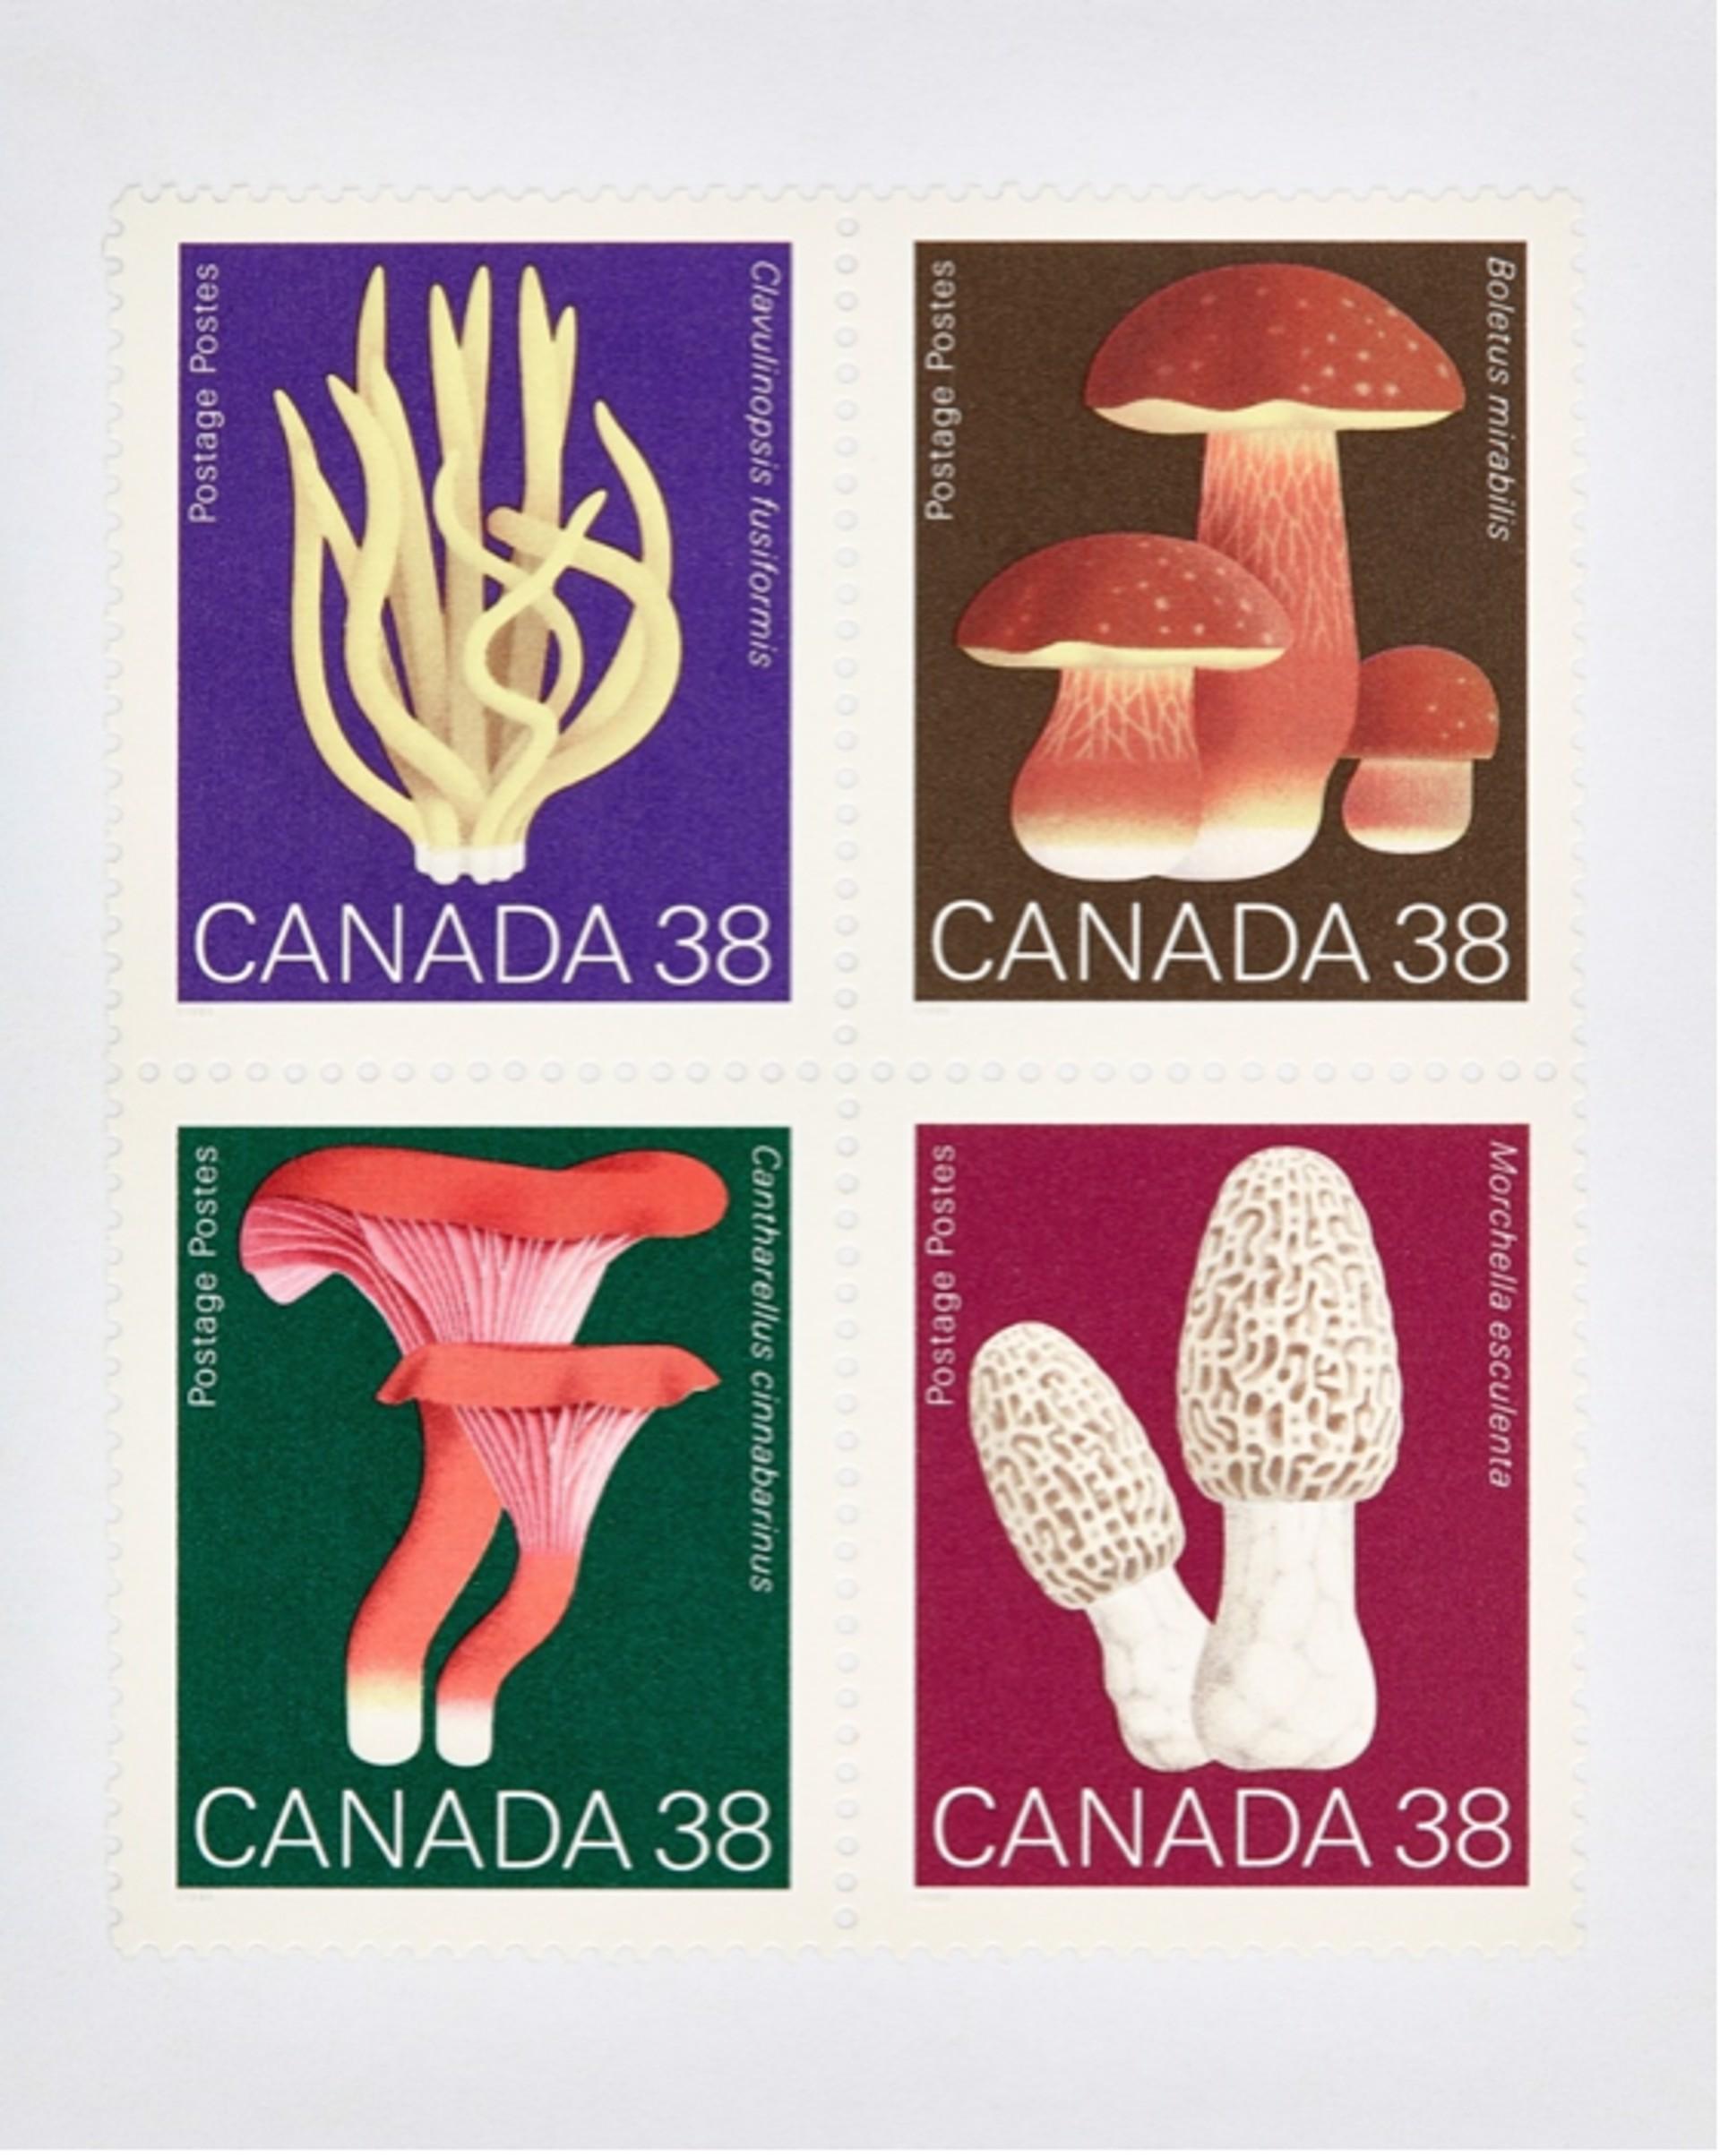 Canada Mushroom 38 x 4
Digital C-Print / Archival Pigment Print
Edition of 20 per size
Available sizes:
48 x 36

“Collectible” series is a macro level exploration of coins, bills and stamps. These images are created with the intention of being